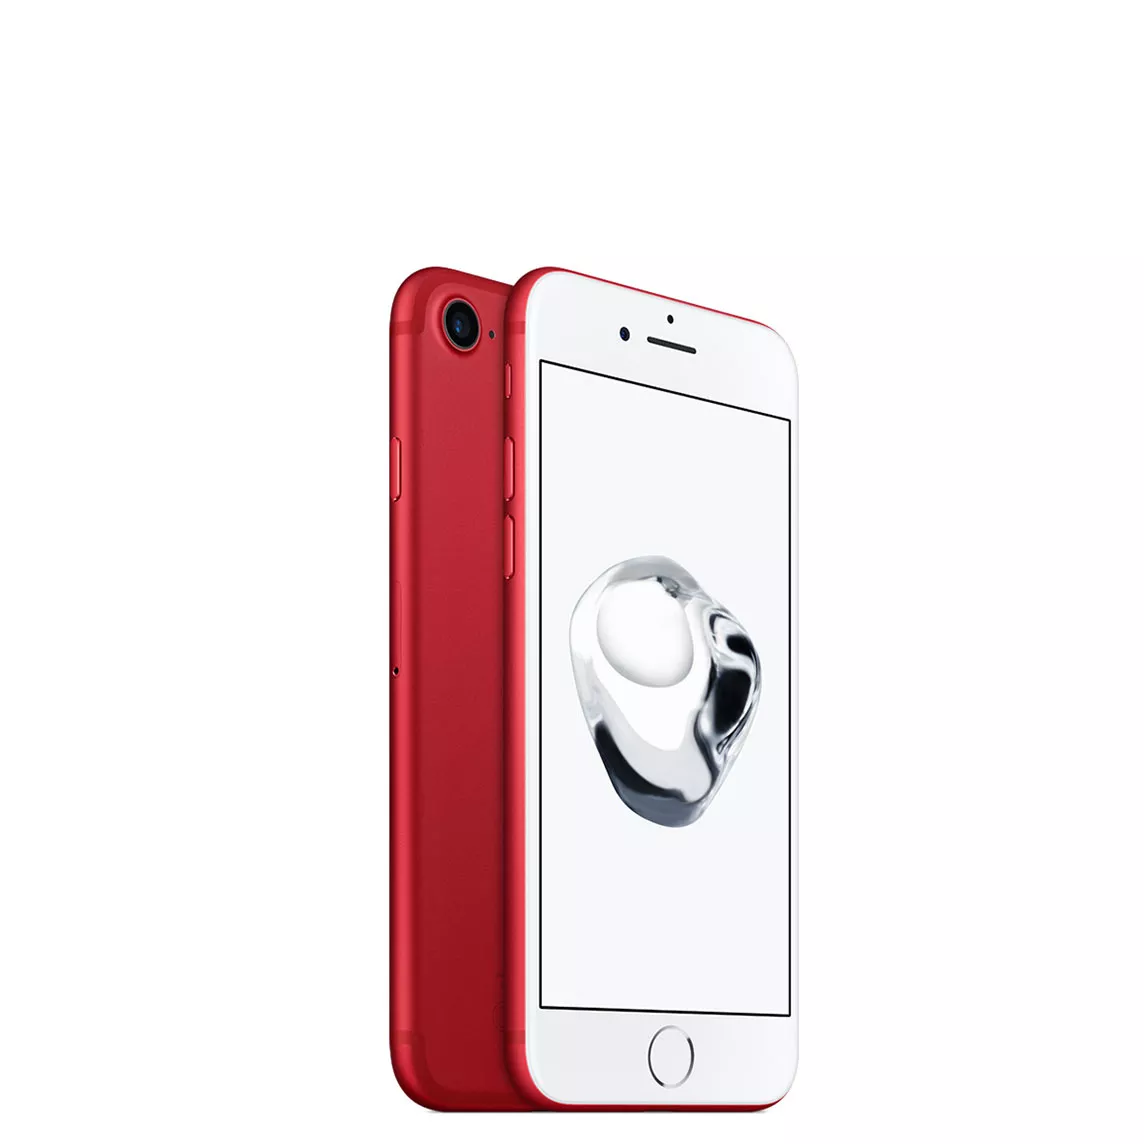 Apple iPhone 7 256ГБ (PRODUCT)RED Special Edition. Вид 1